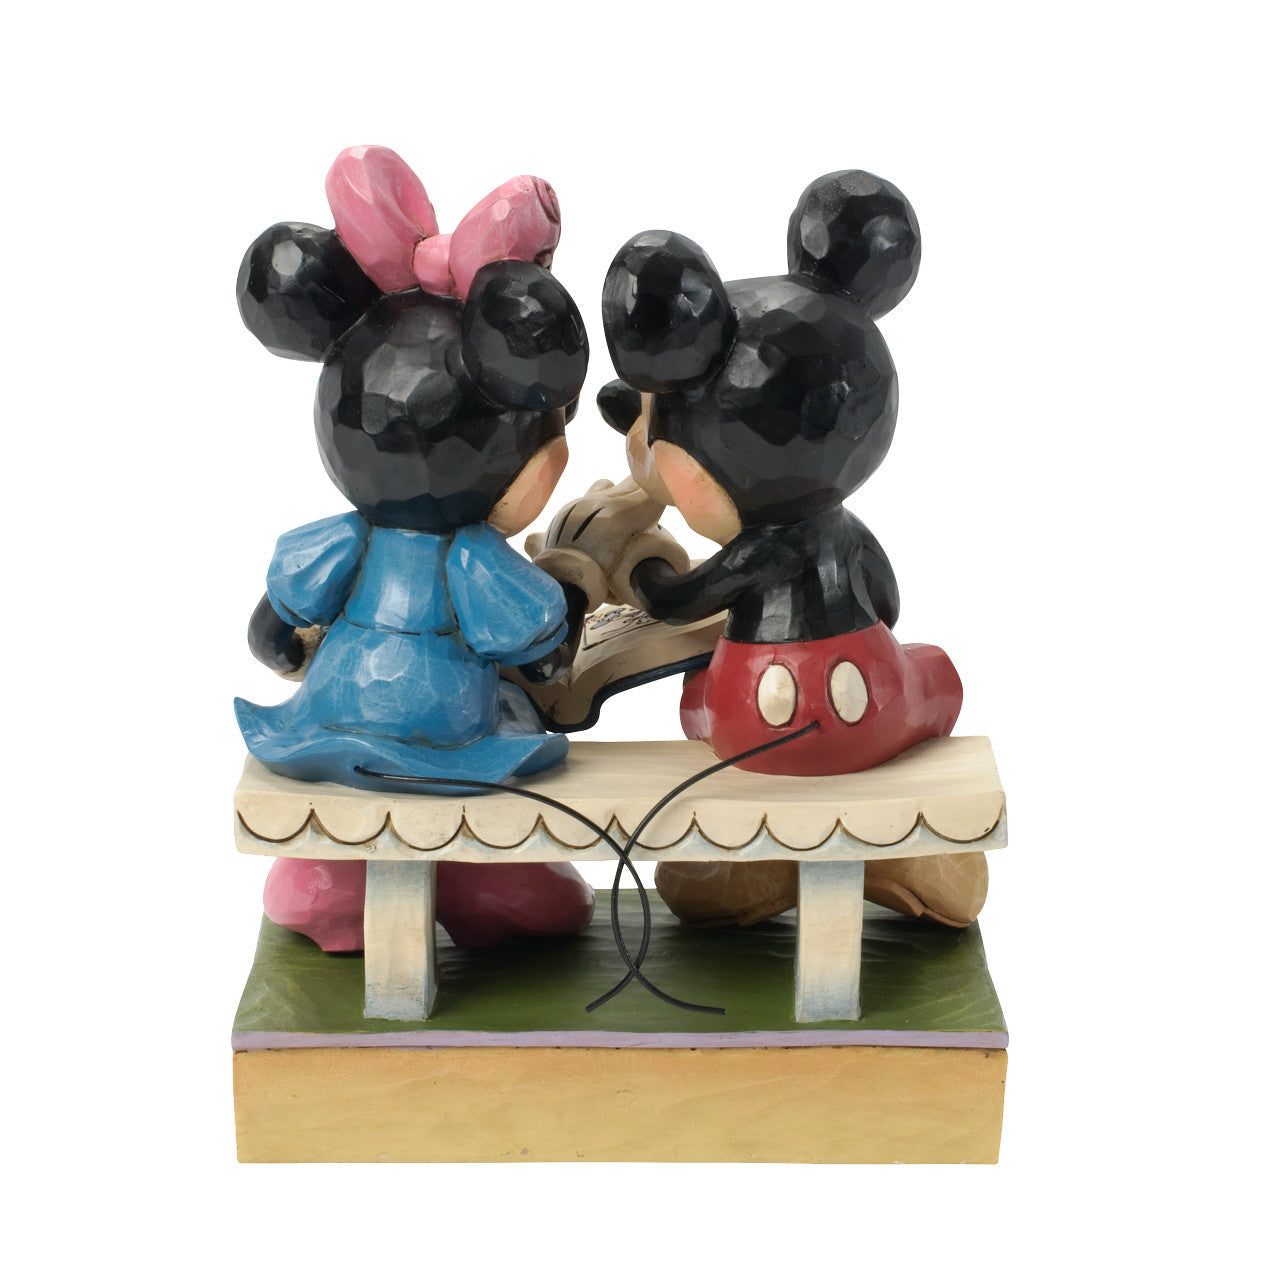 Sharing Memories - Mickey and Minnie Mouse